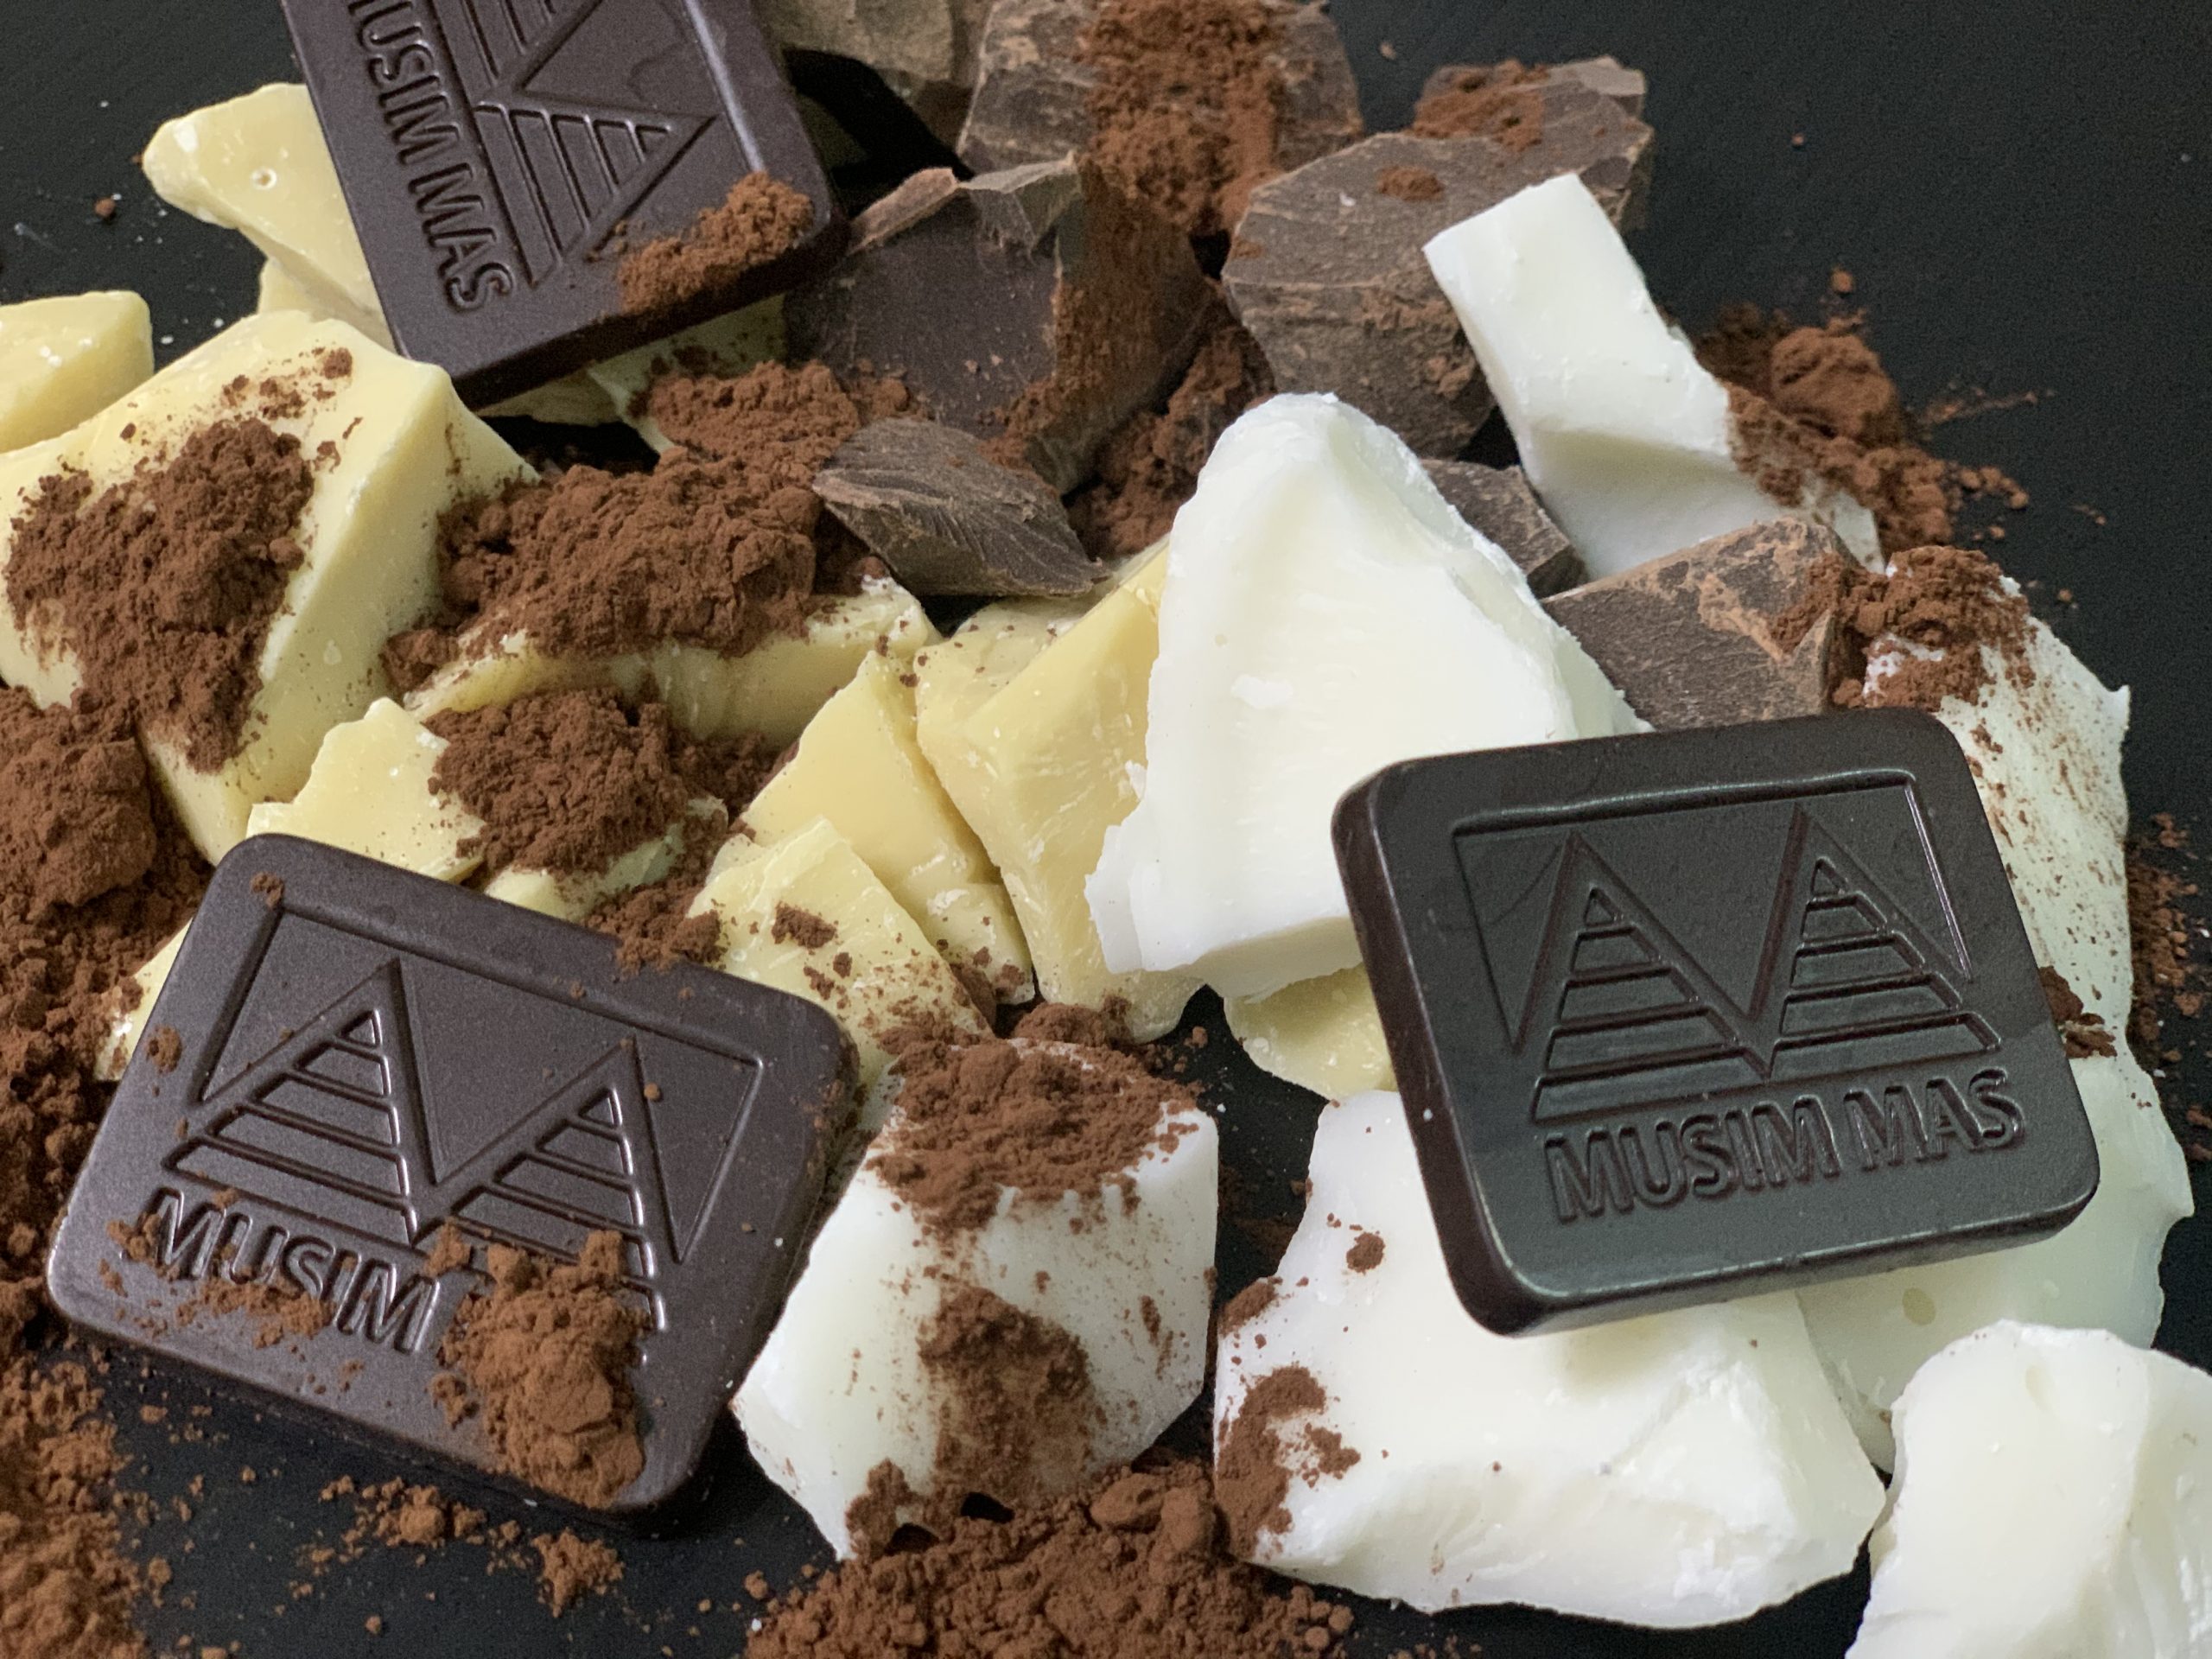 Chocolate ingredients with CBE